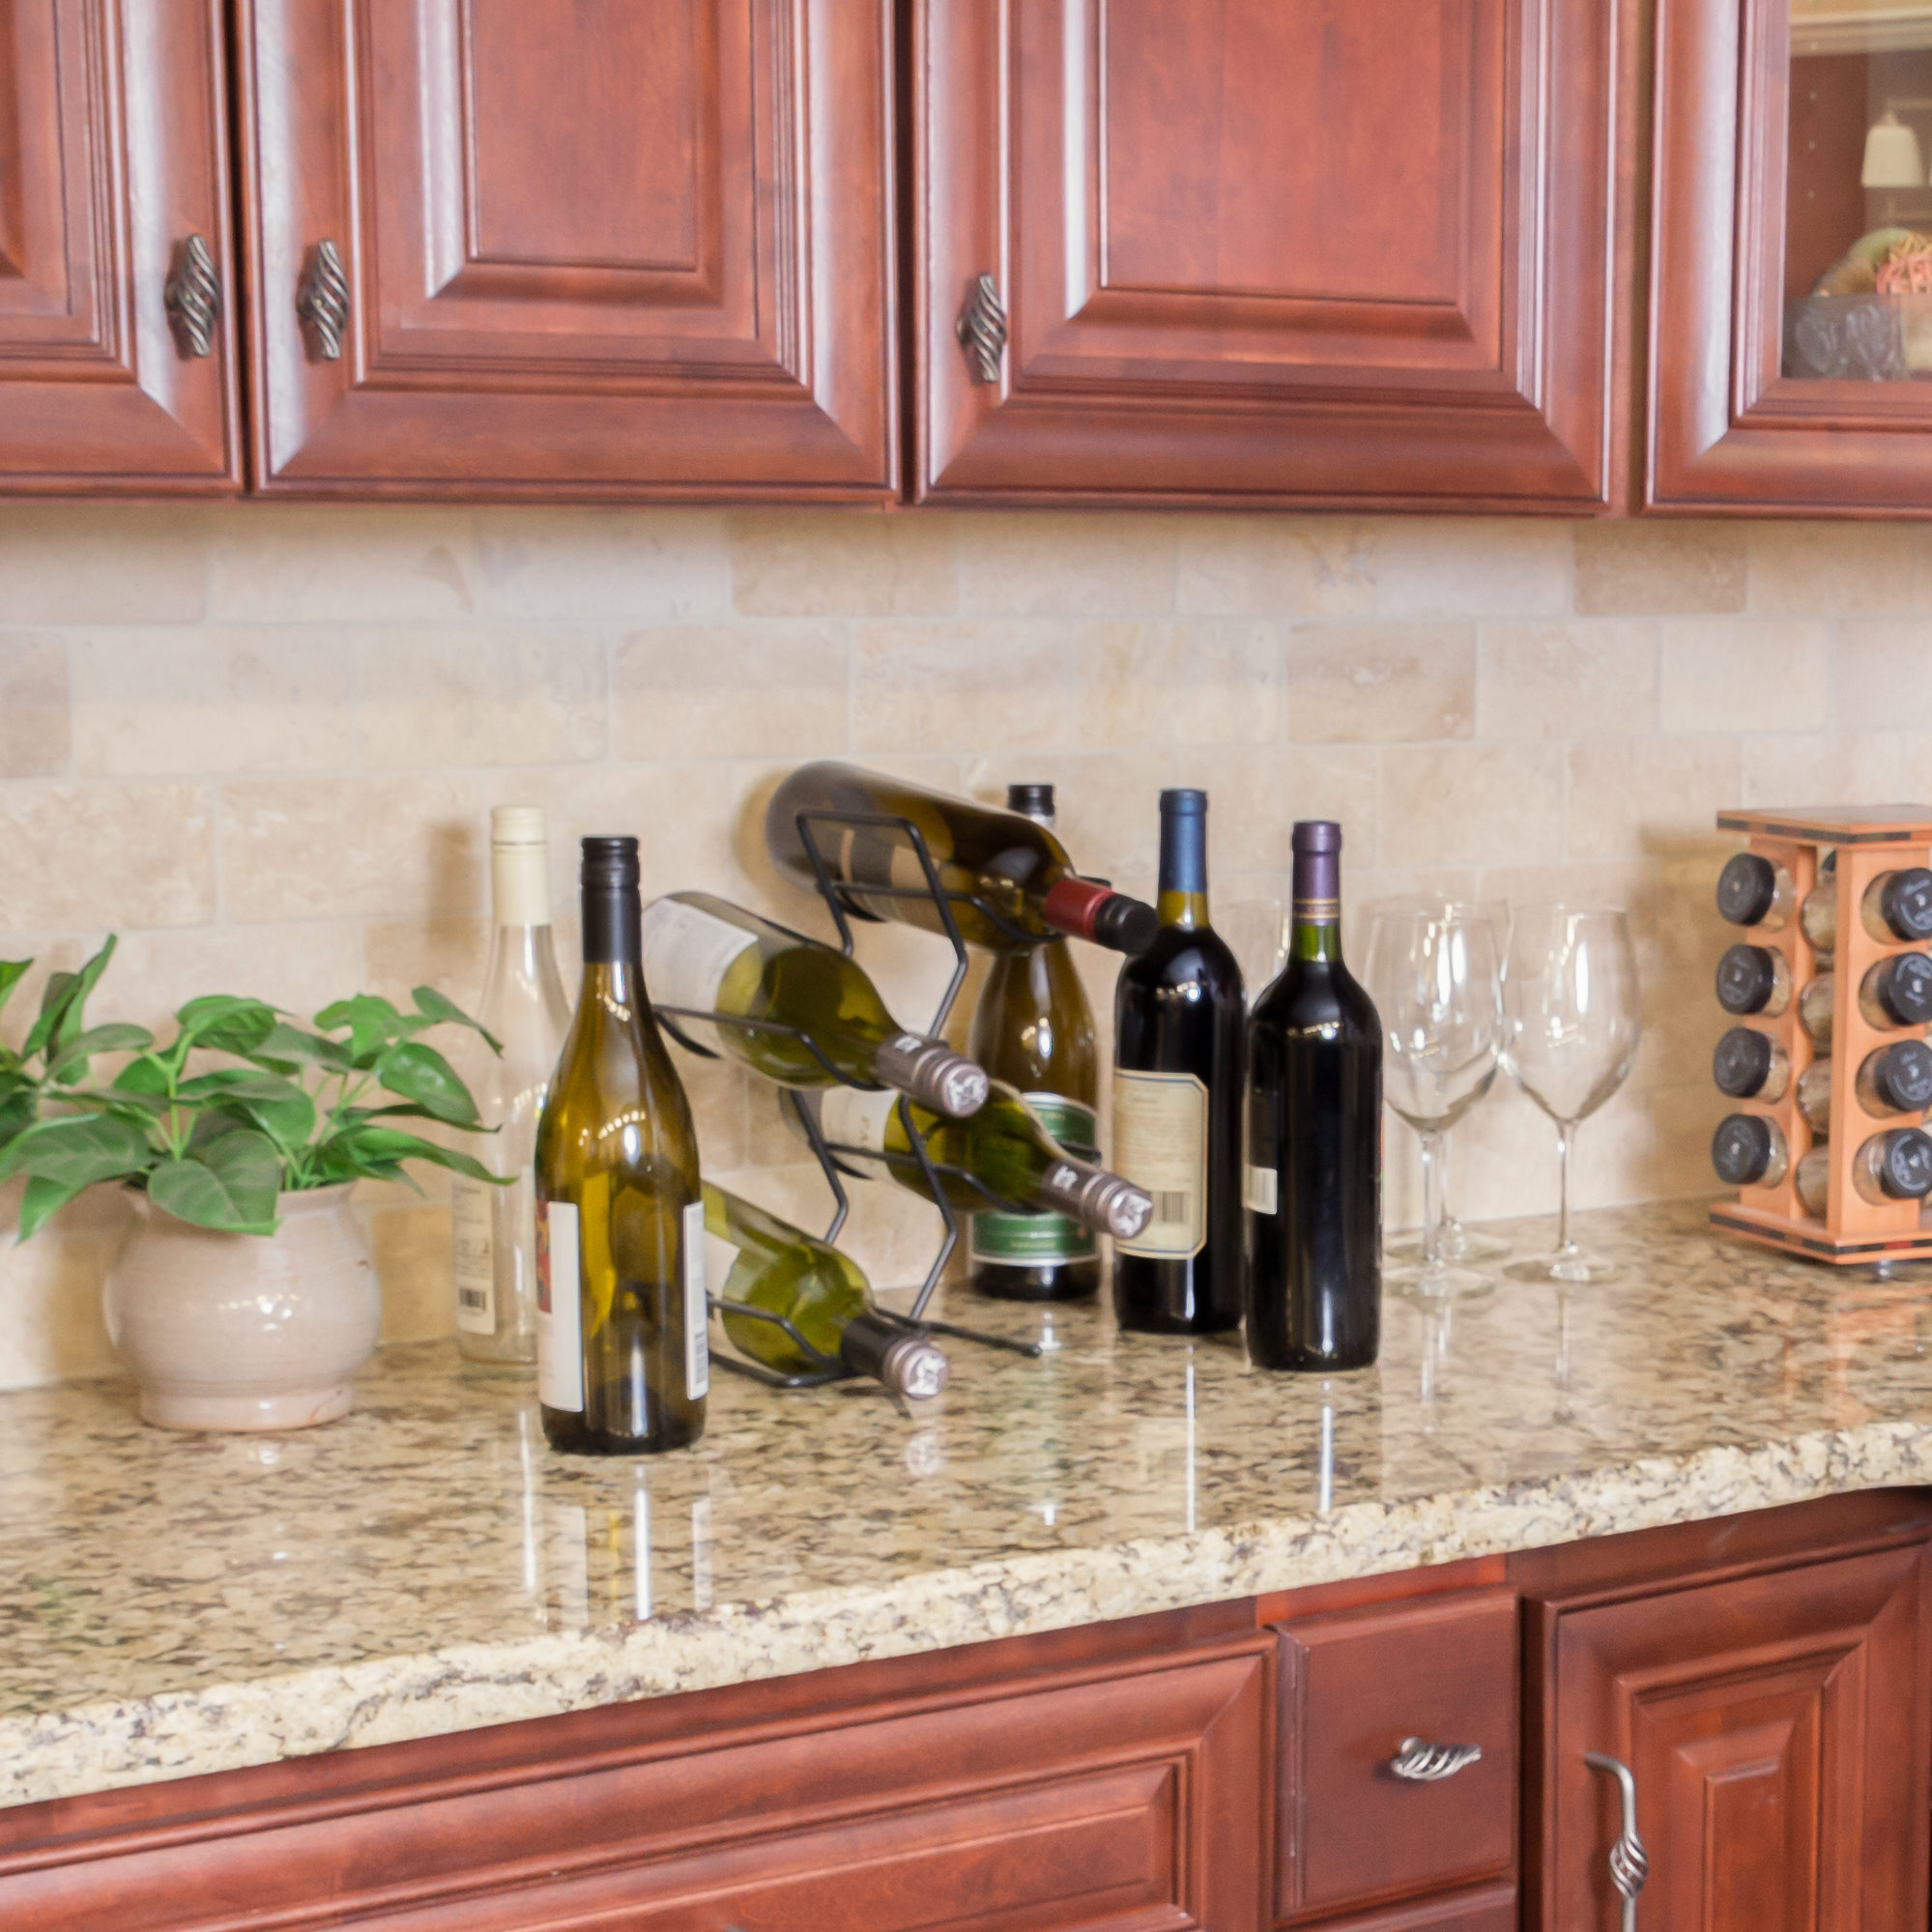 Cluttered countertops are a thing of the past when you store your wine in an in-cabinet wine rack.